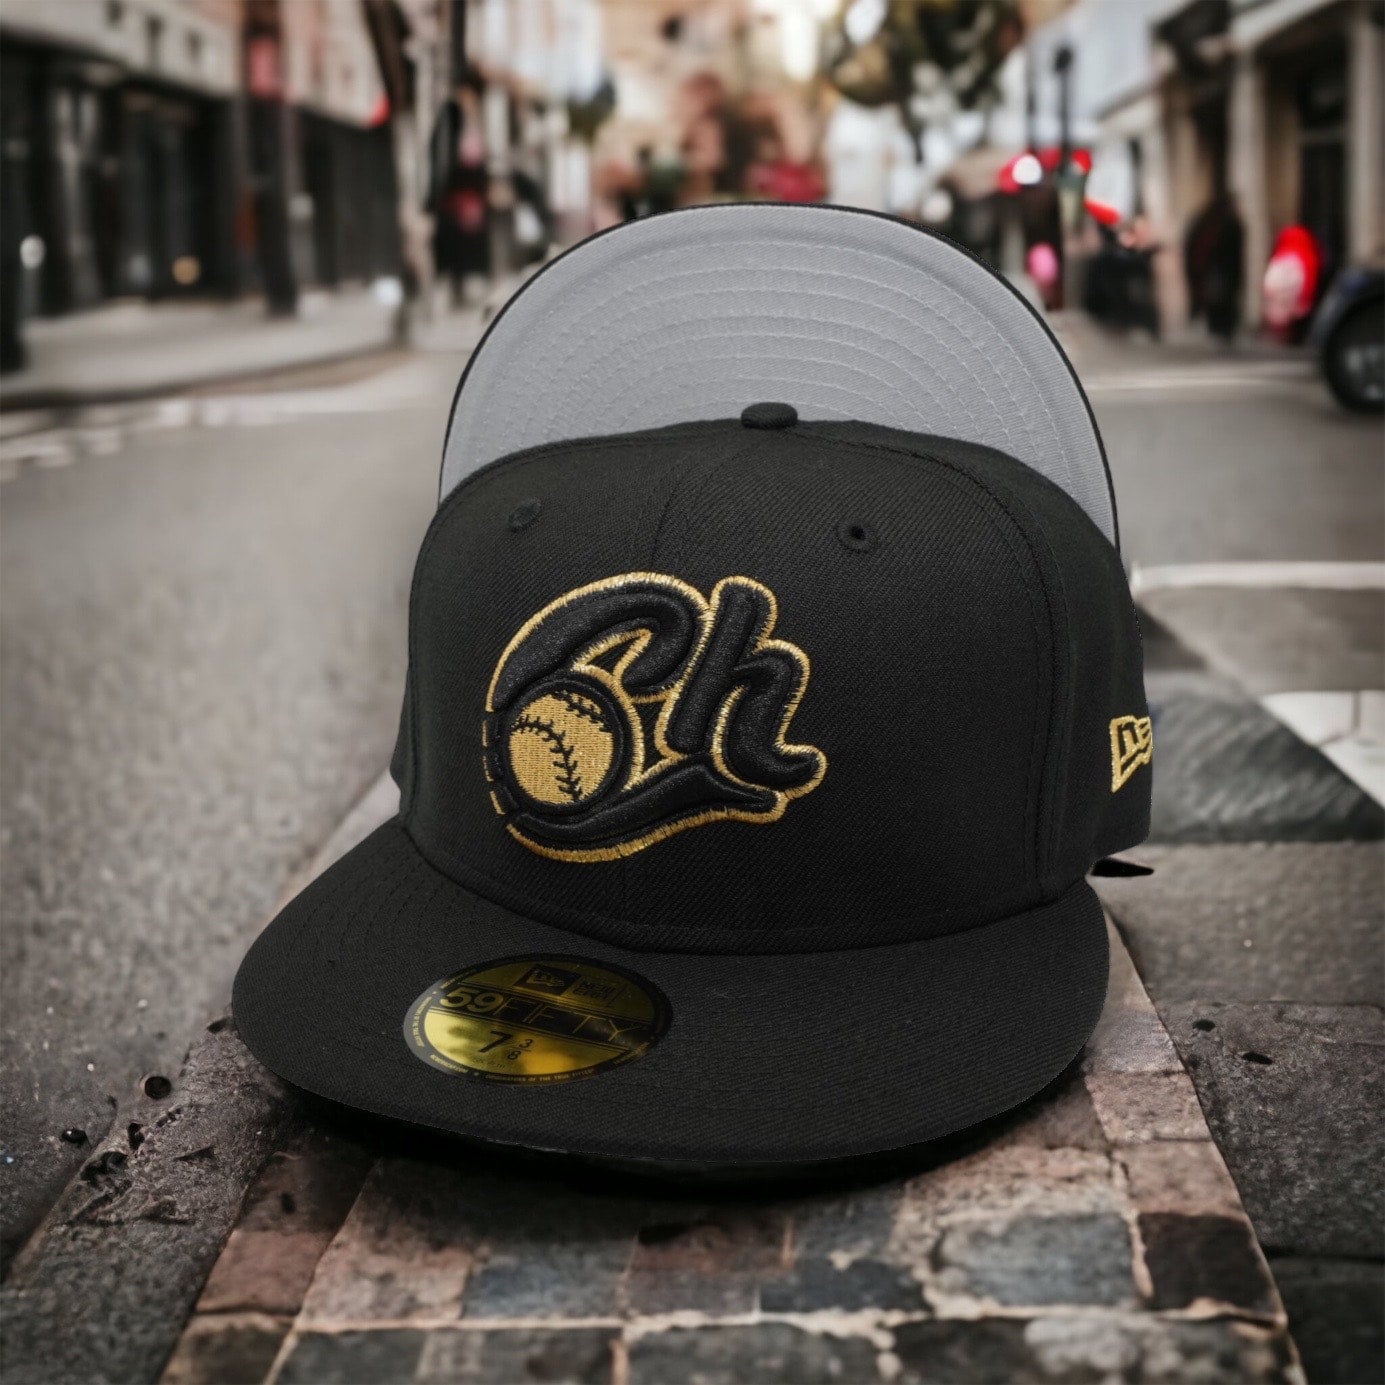 Officially Licensed MLB Men's New Era Alt Collection Fitted